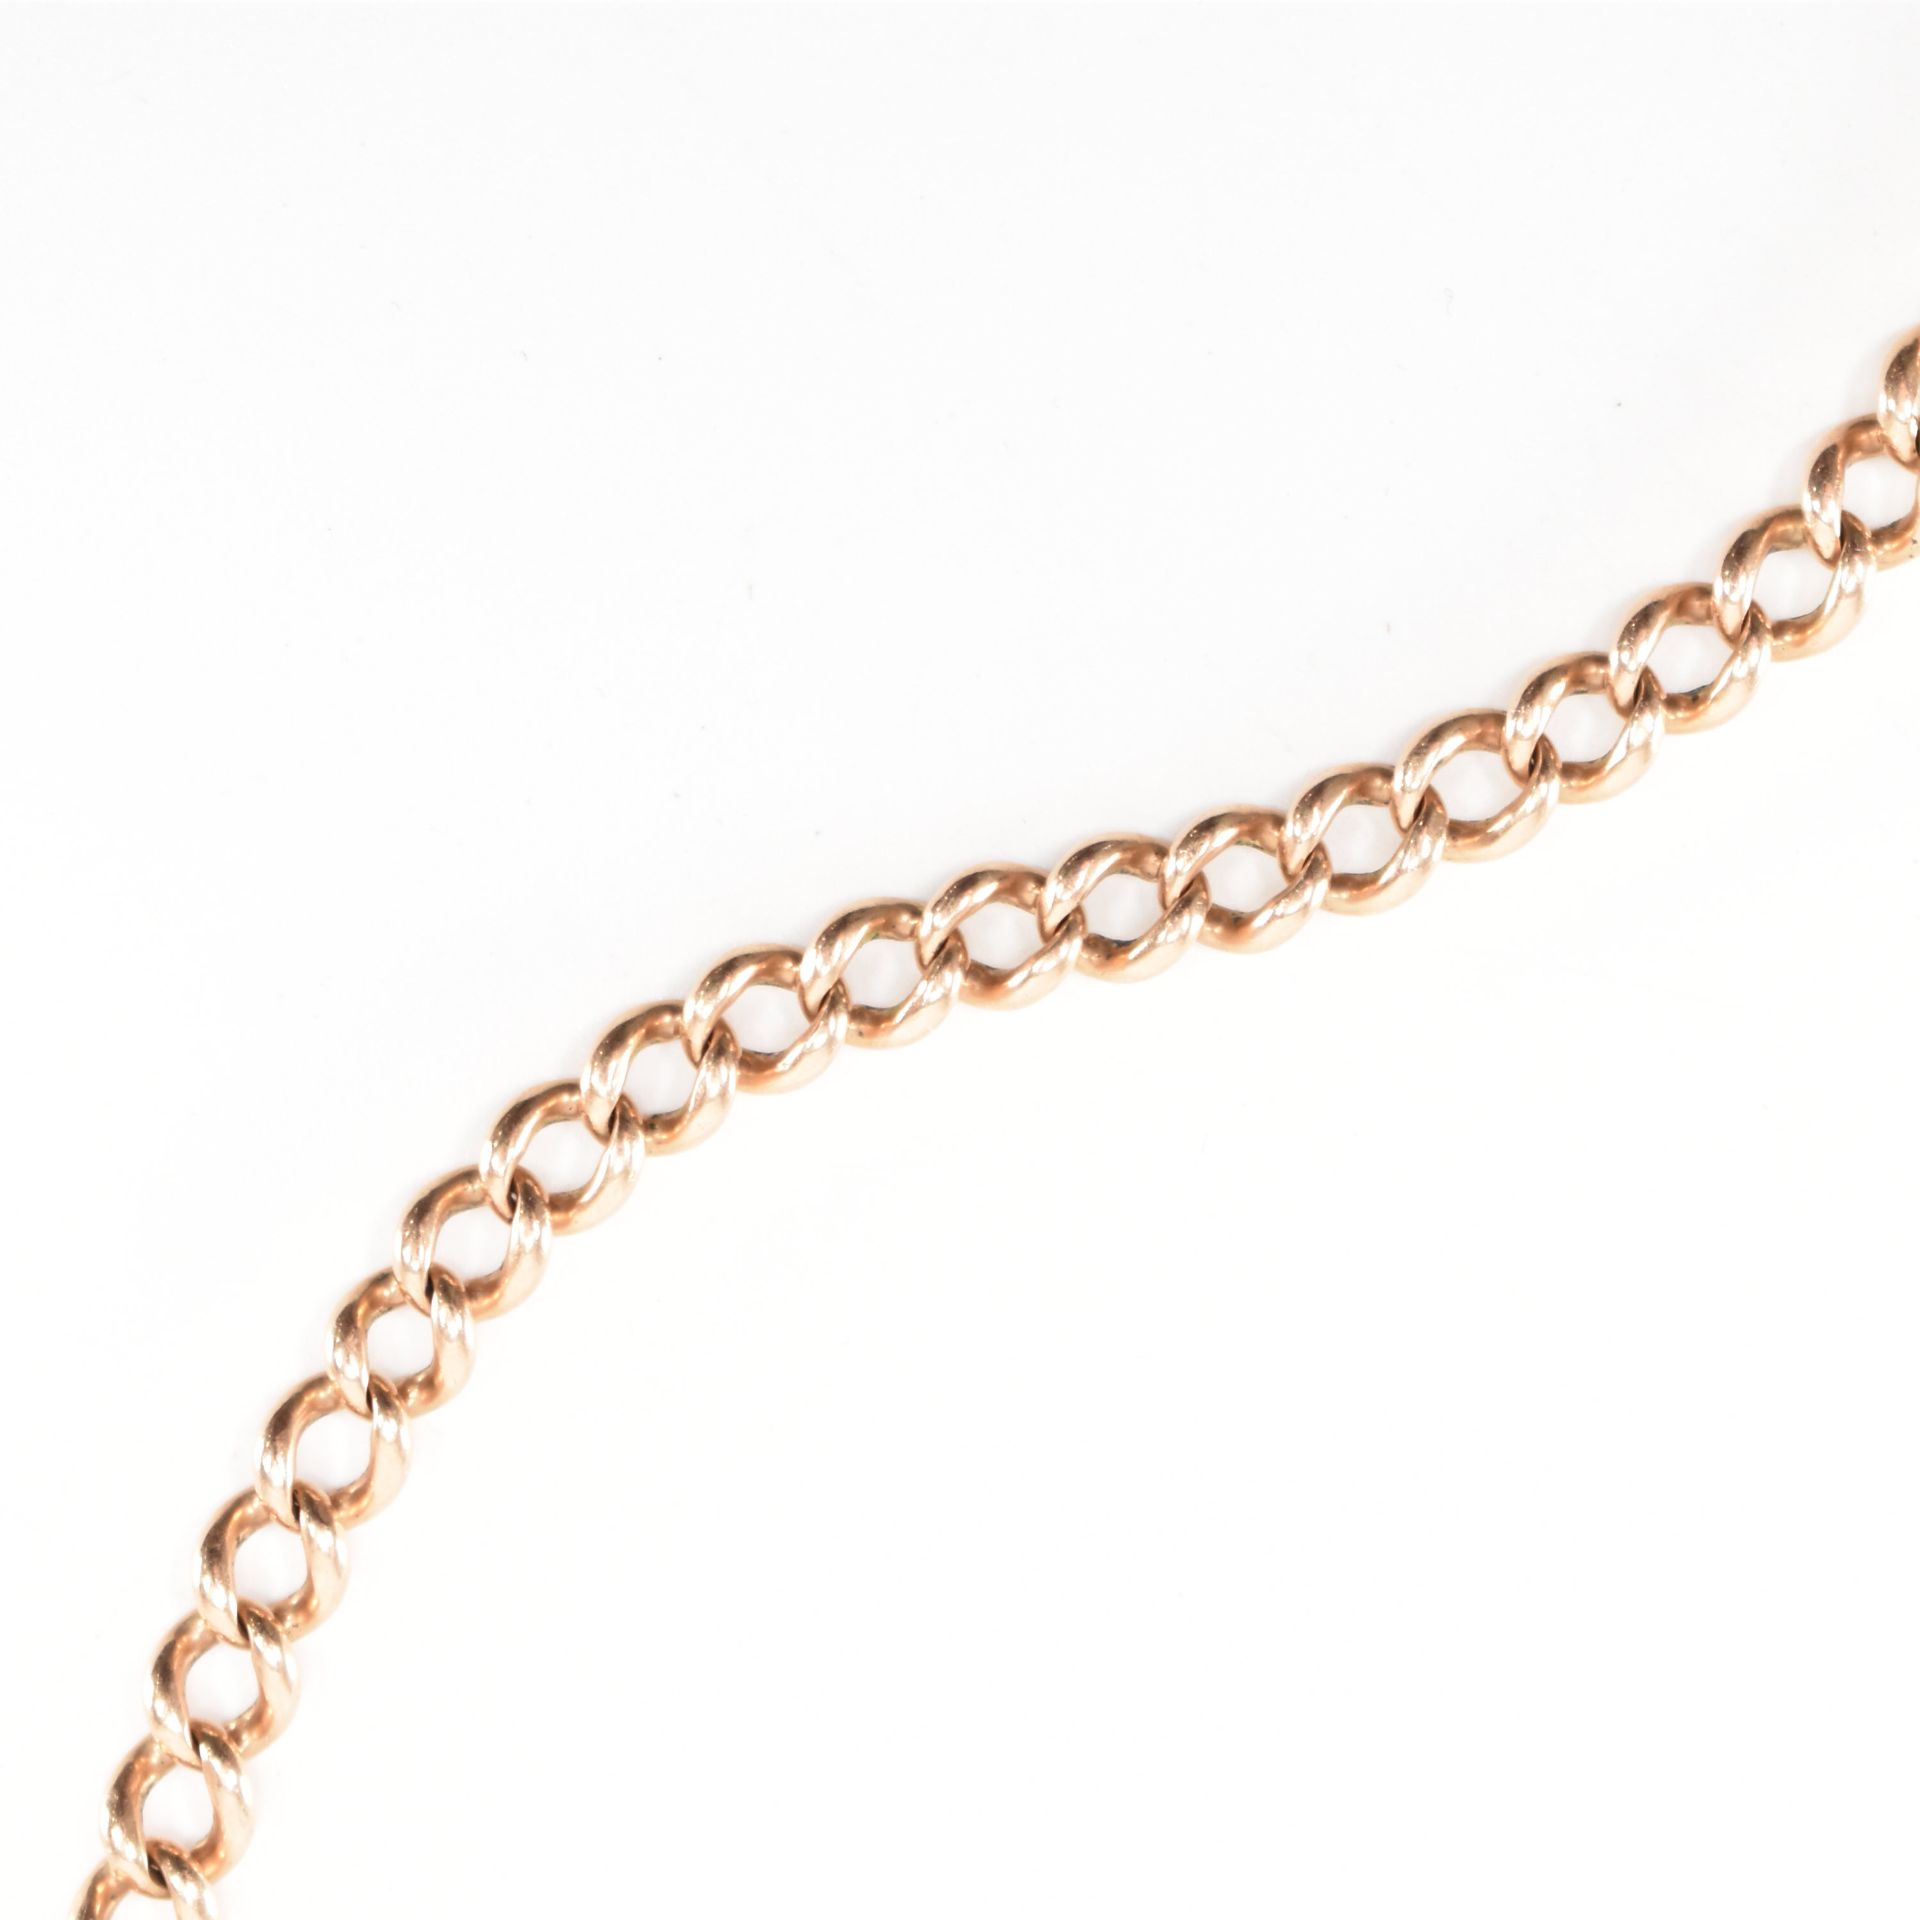 9CT ROSE GOLD WATCH CHAIN BRACELET - Image 2 of 3